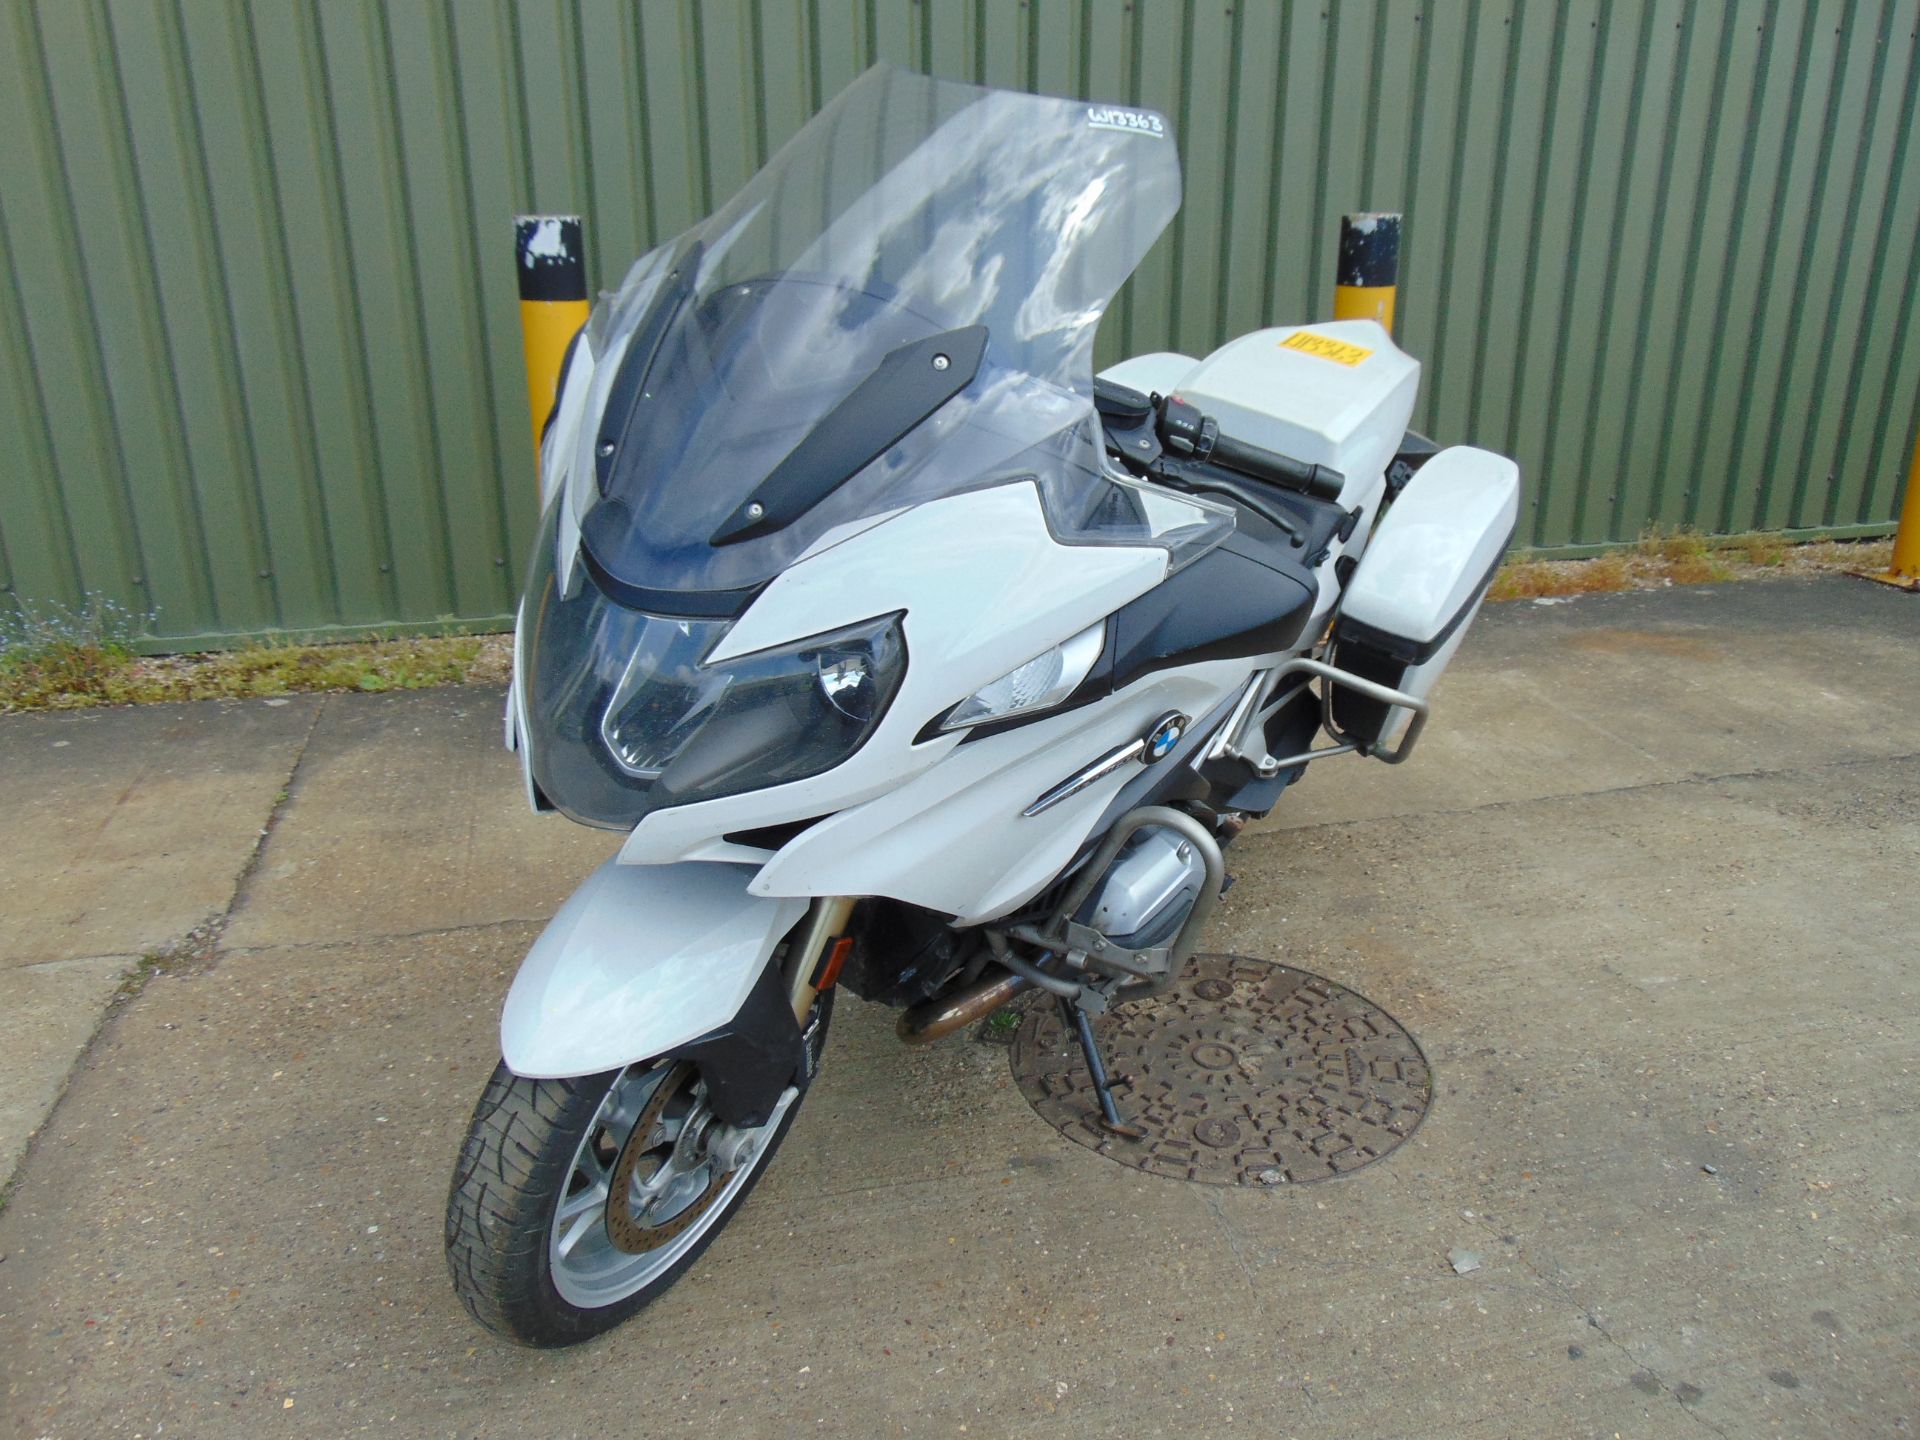 UK Police a 1 Owner 2019 BMW R1200RT Motorbike - Image 2 of 20